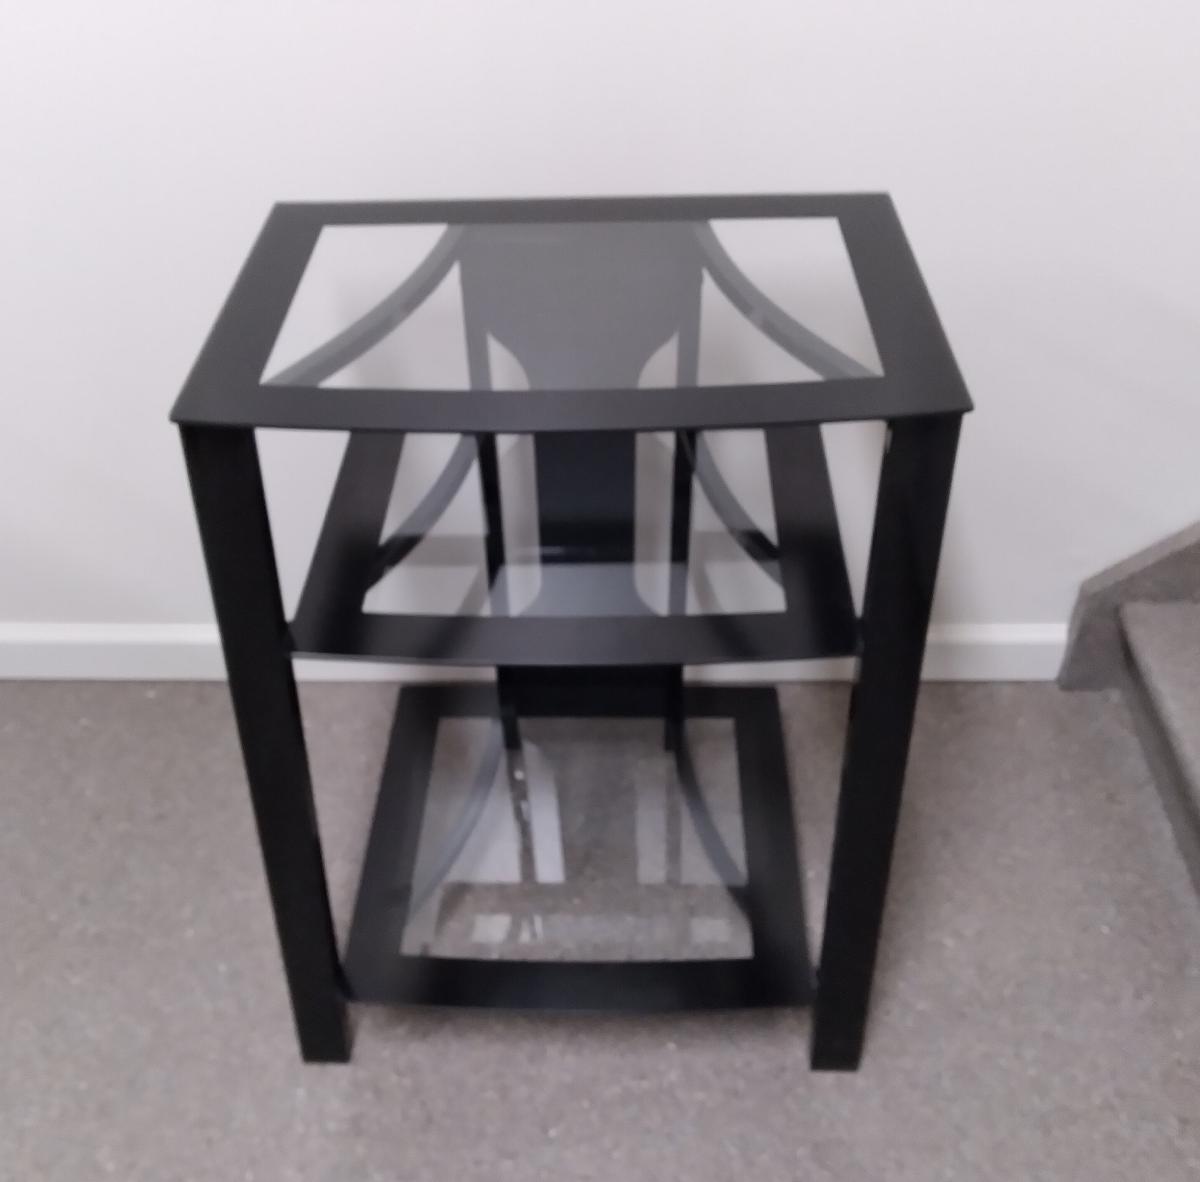 BLACK & CLEAR GLASS 3 SHELF TV STAND TABLE